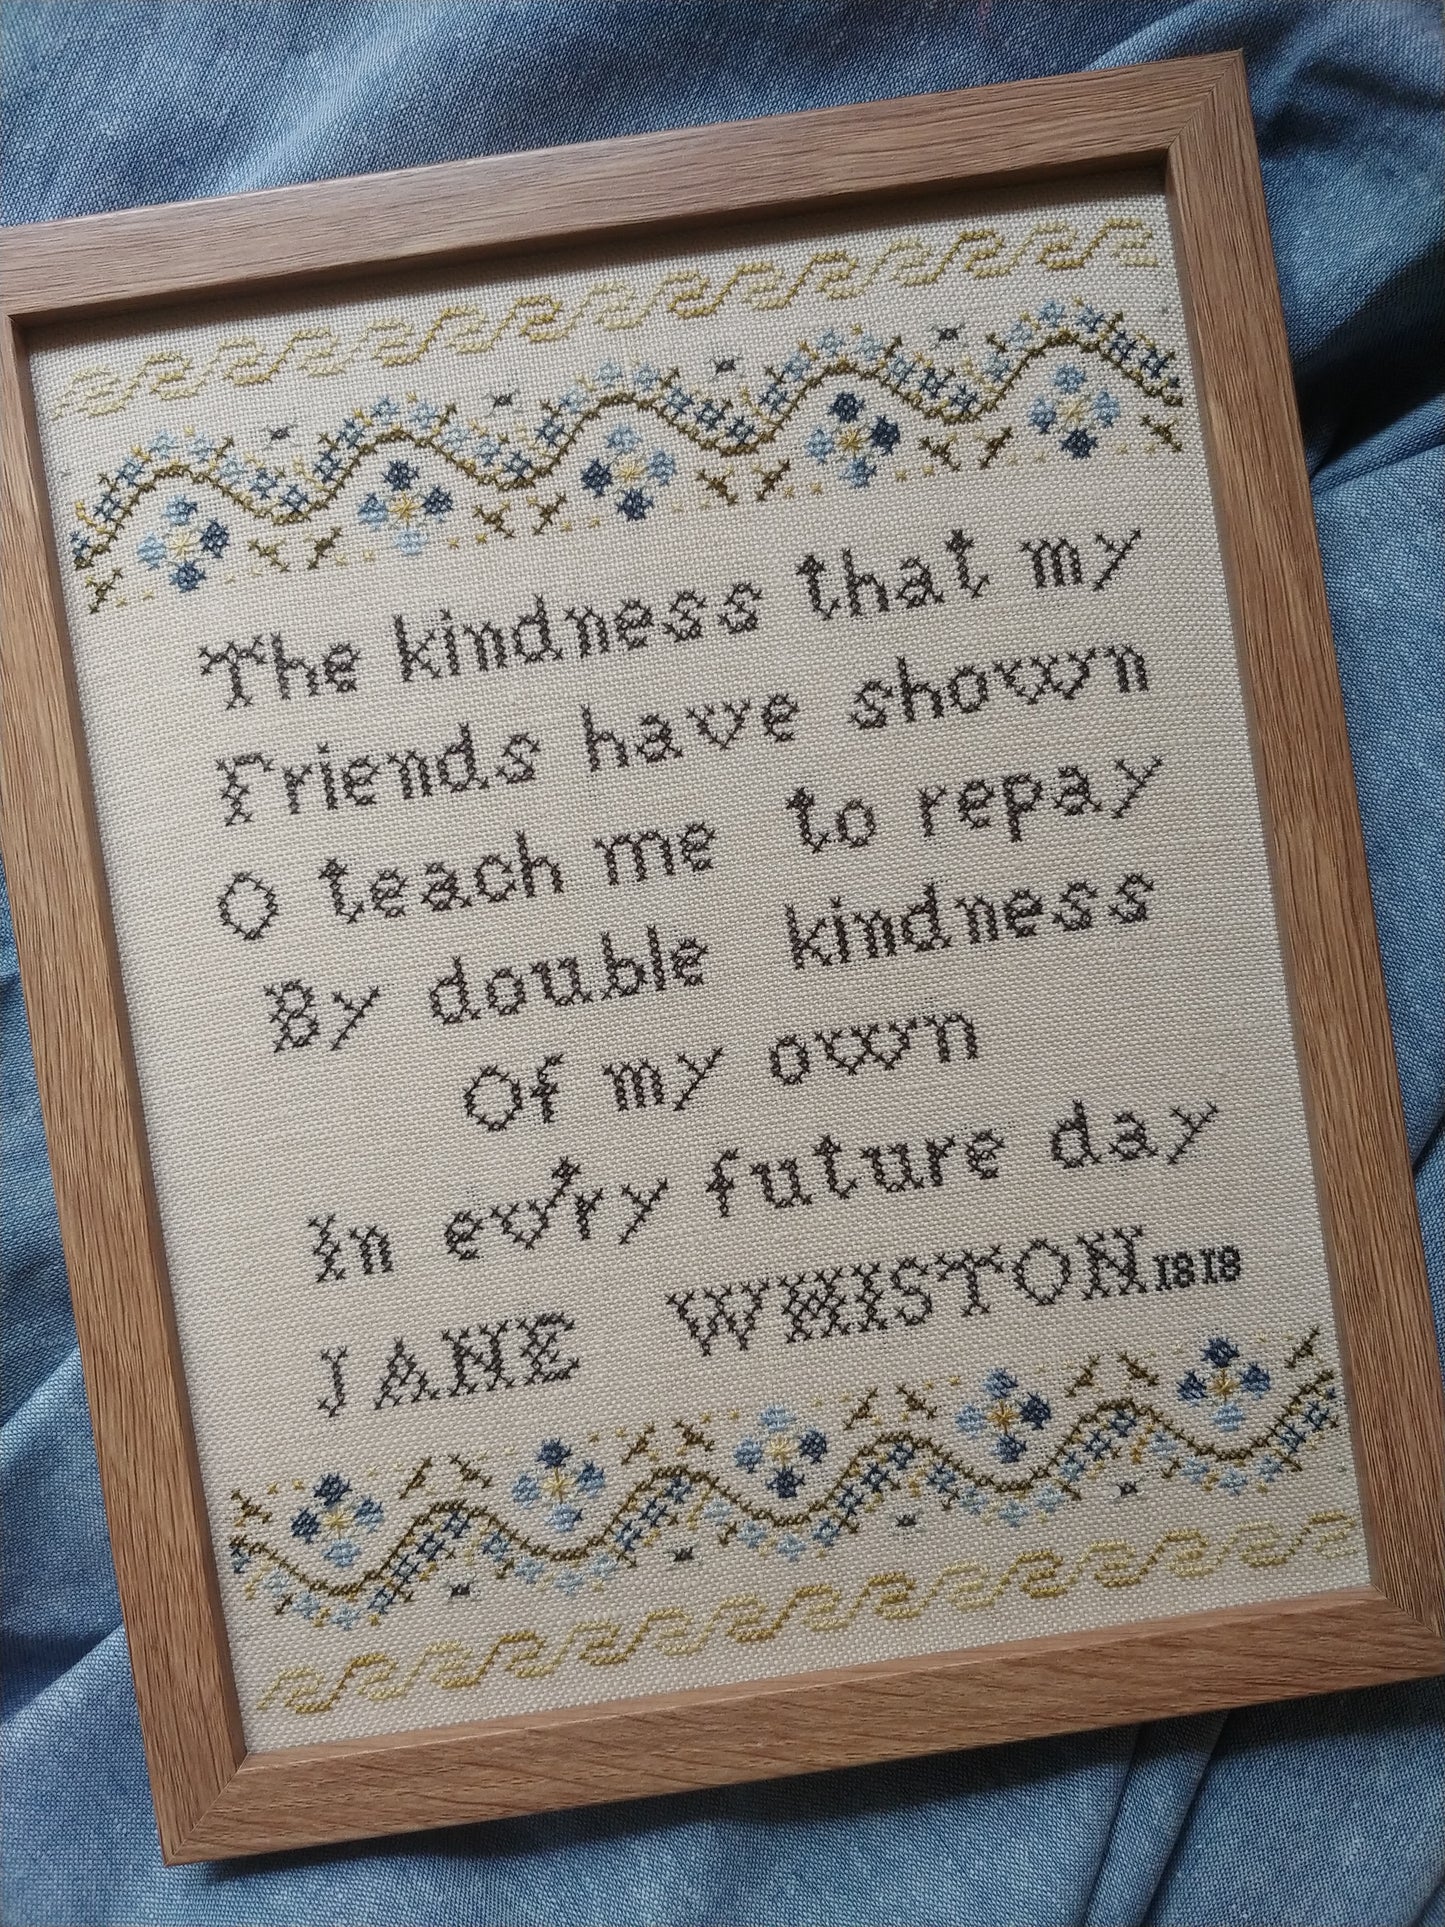 Copy of On Kindness: Jane Whiston 1818 with Thread Pack Option | Mojo Stitches